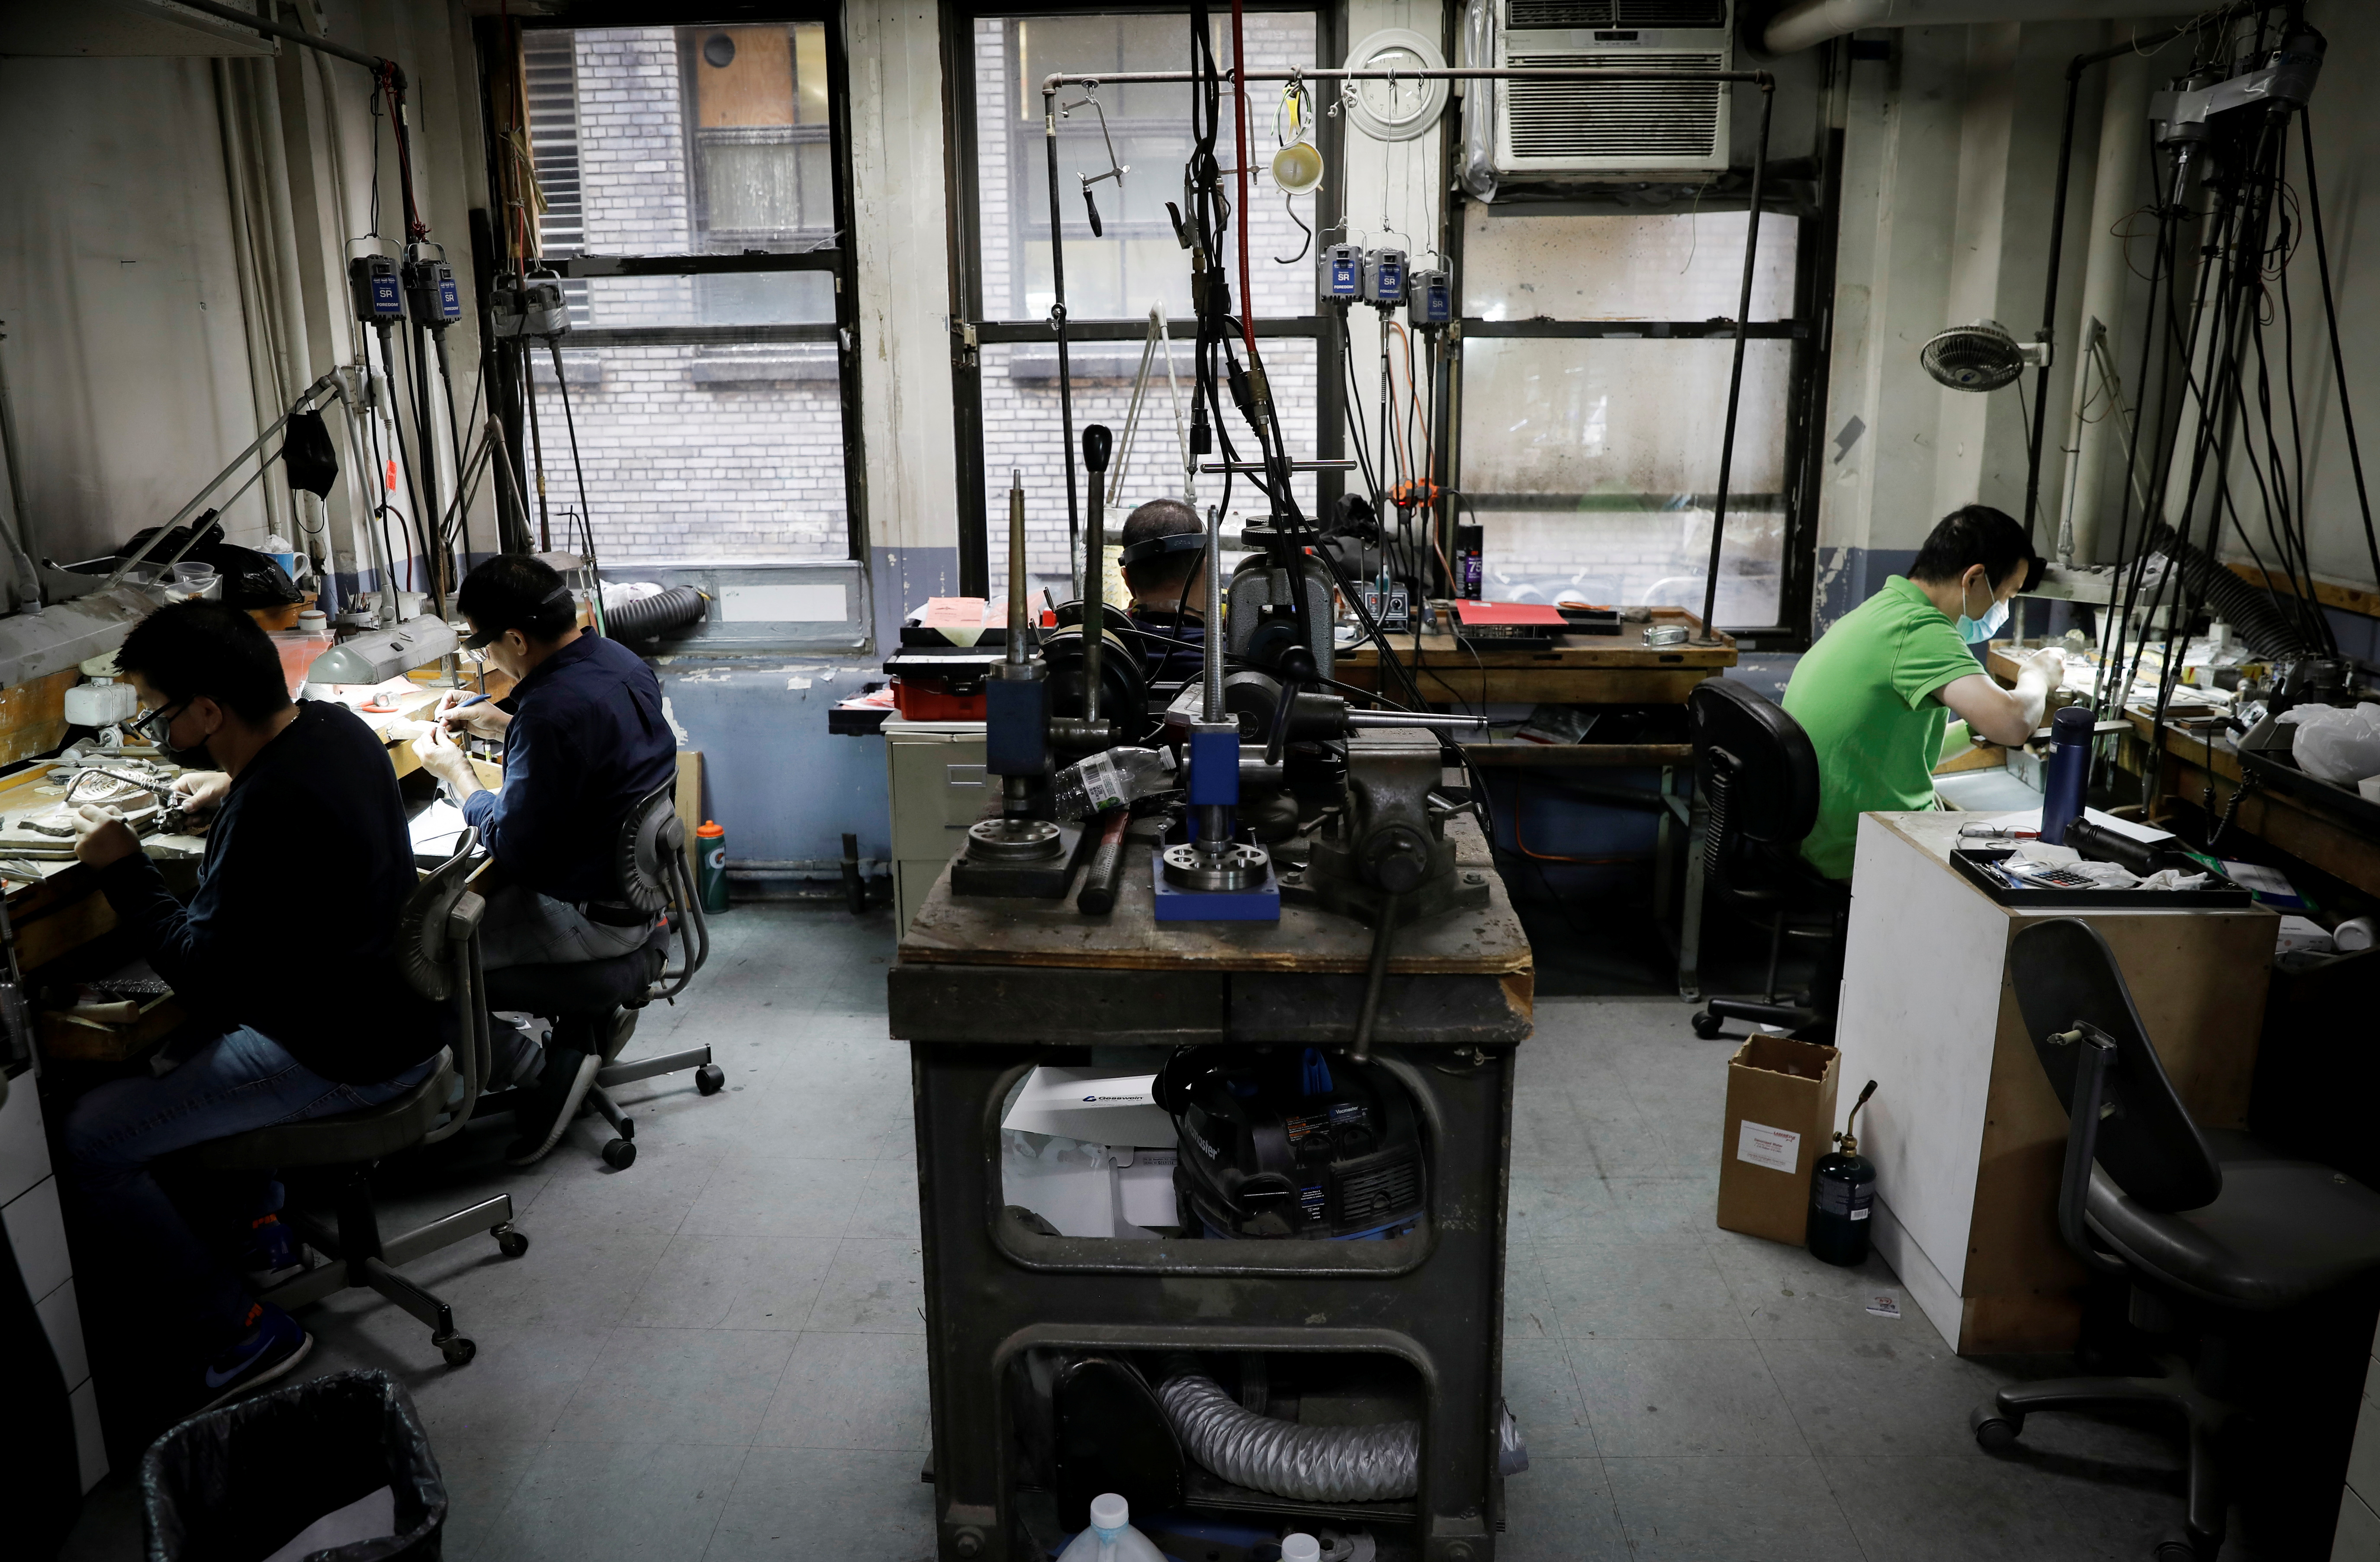 Jewelry workers at the RFG Manufacturing Riviera jewelry design facility in New York